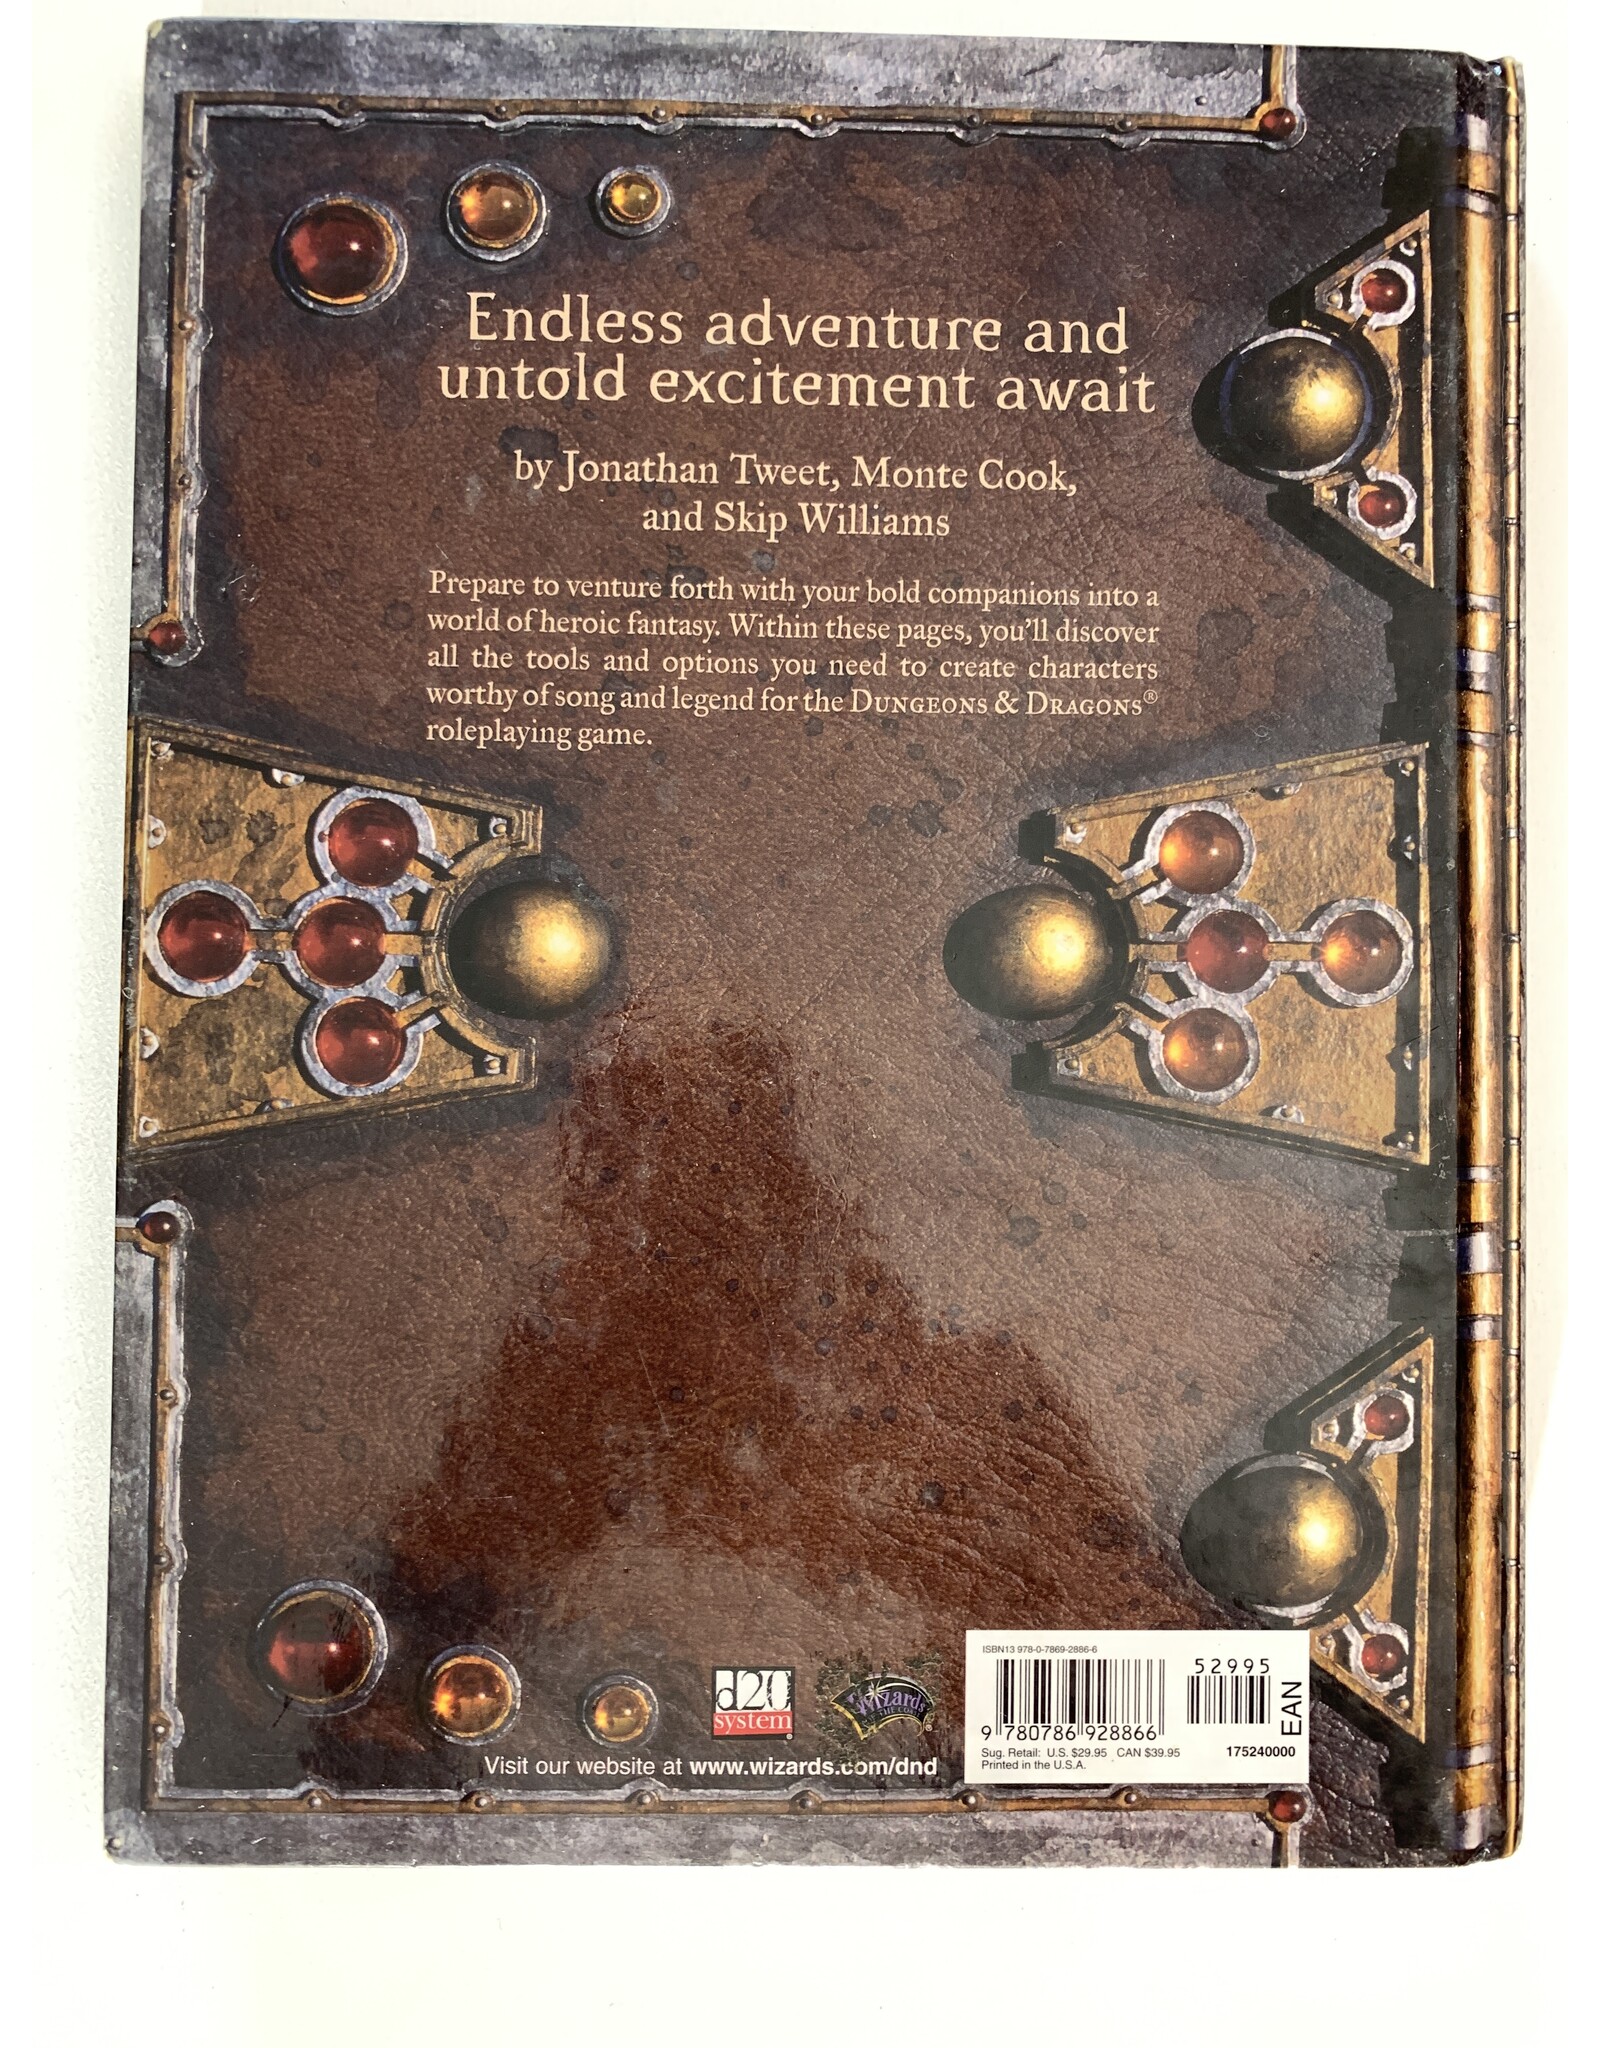 Wizards of the Coast Dungeons & Dragons (3.5 Edition) - Players Handbook  (2001)